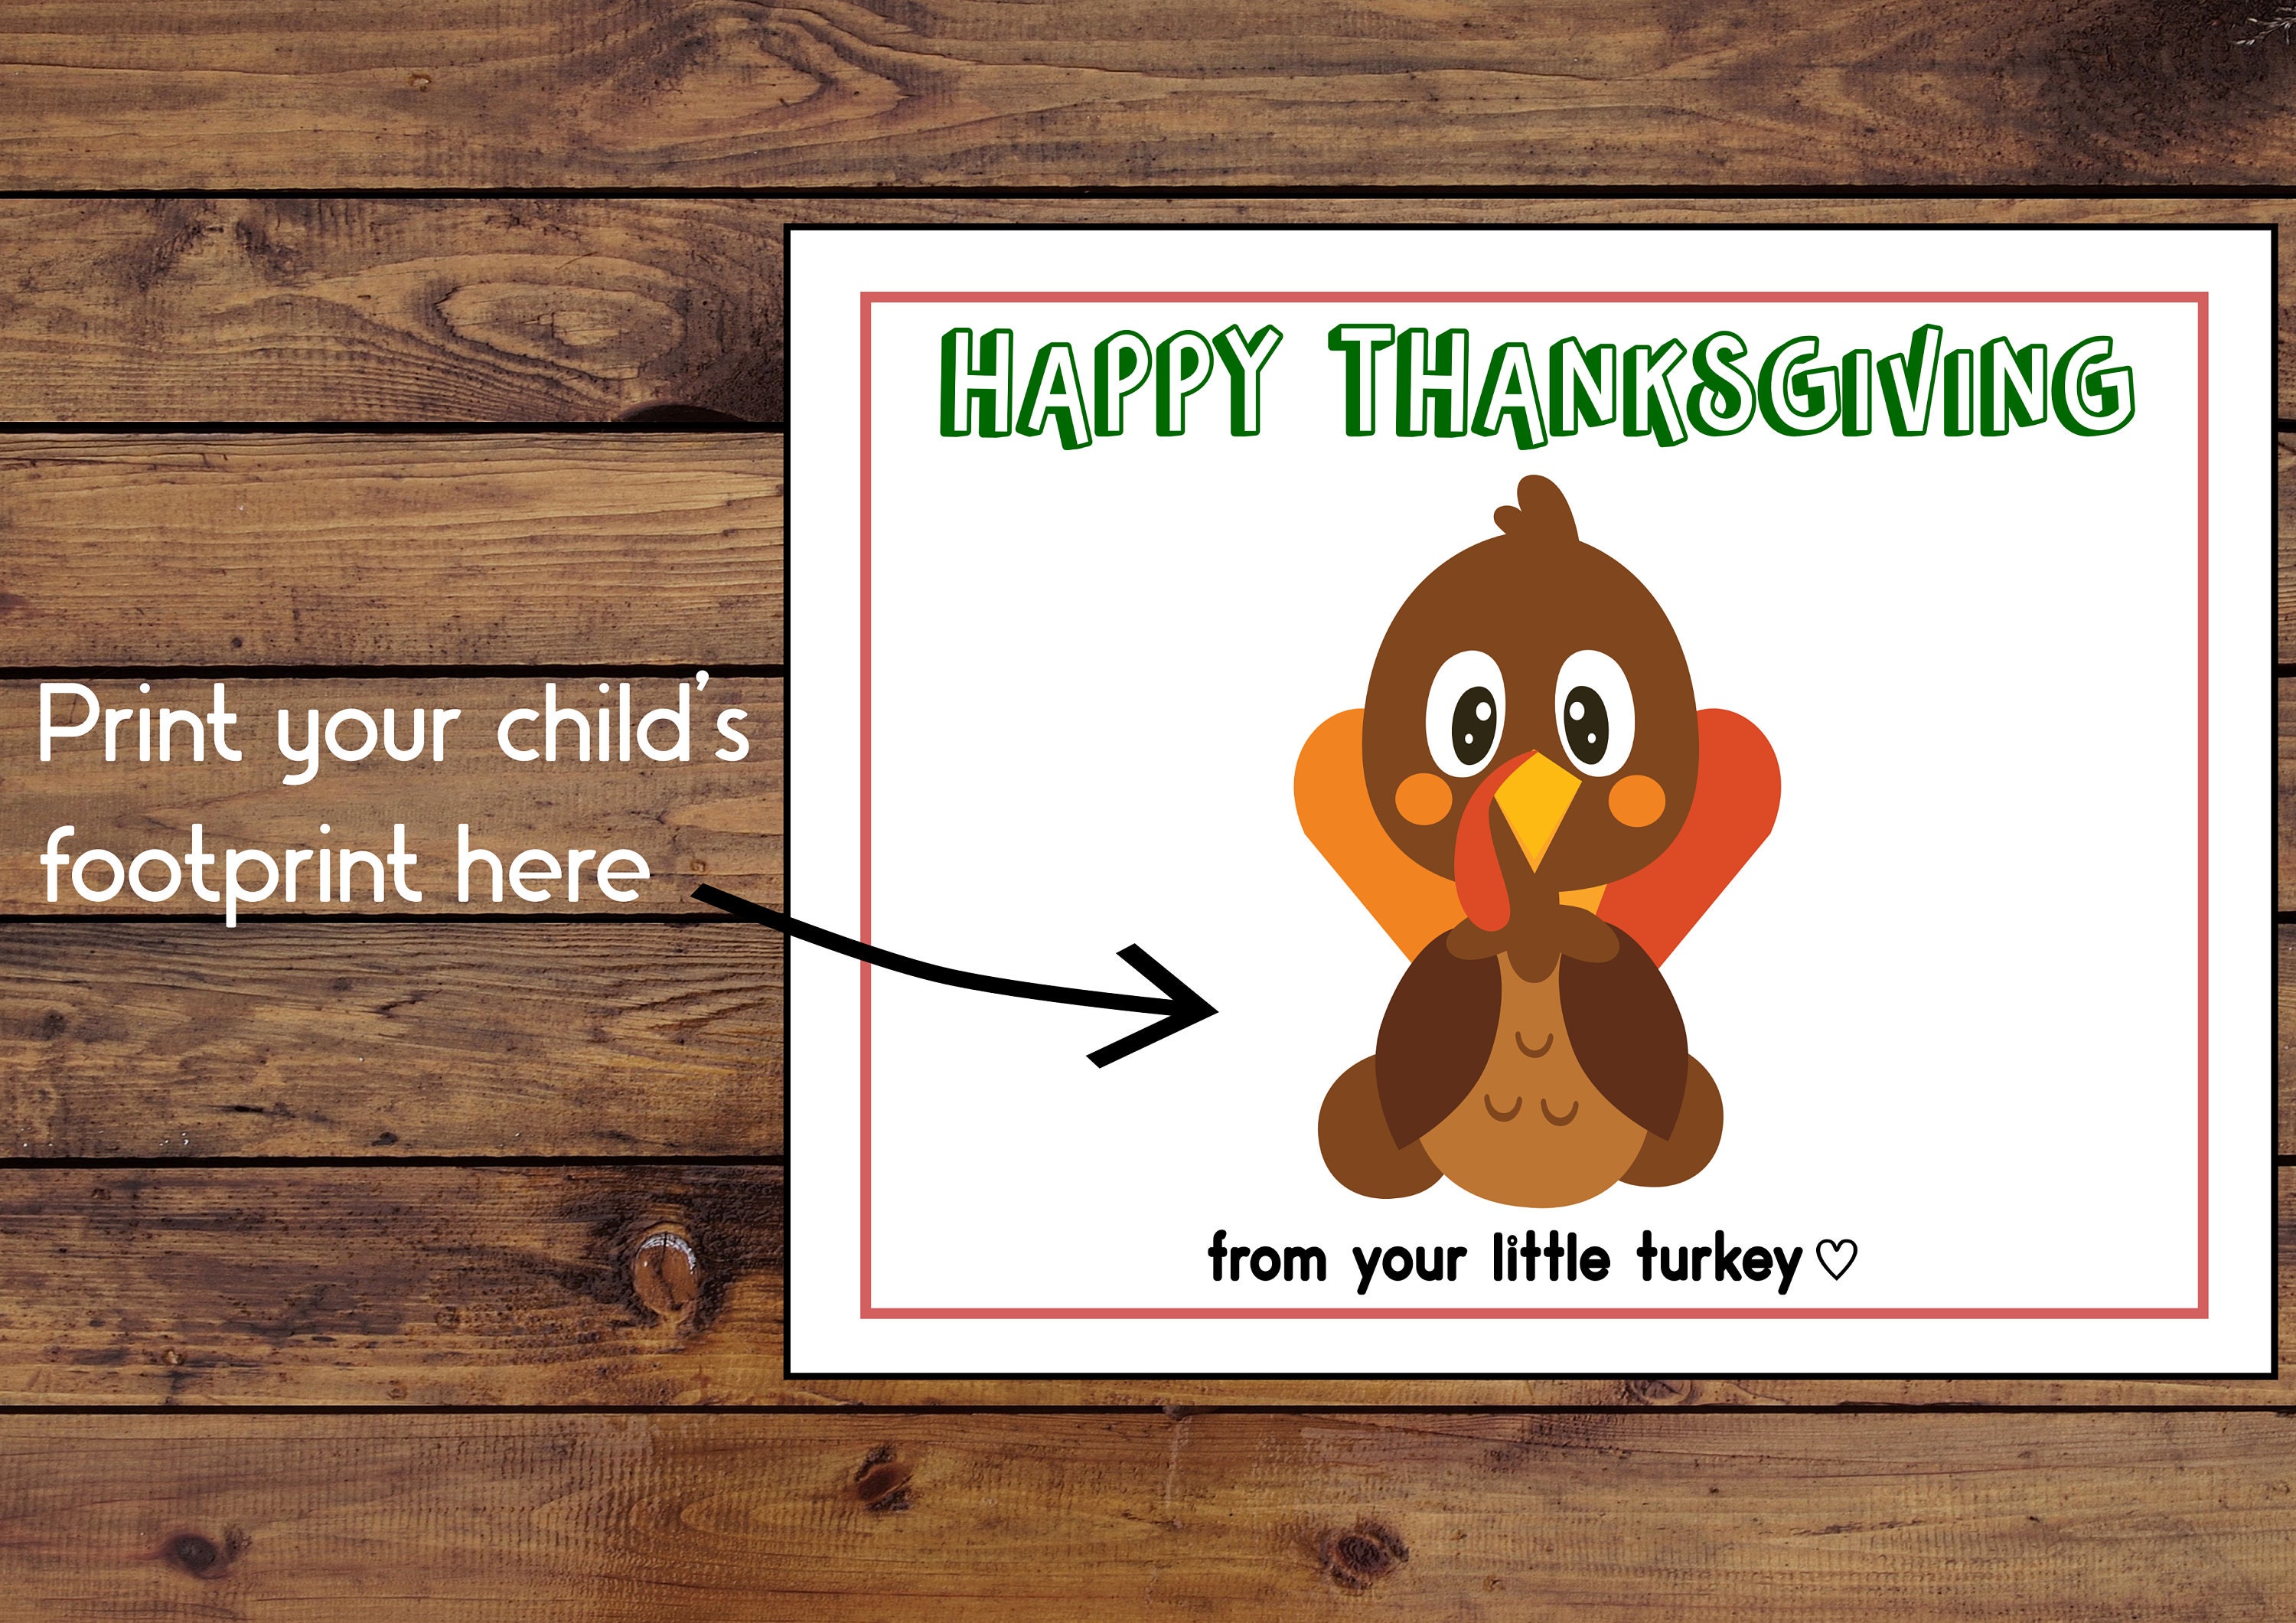 Who Will Carve the Turkey at Your House? - The Well Connected Mom